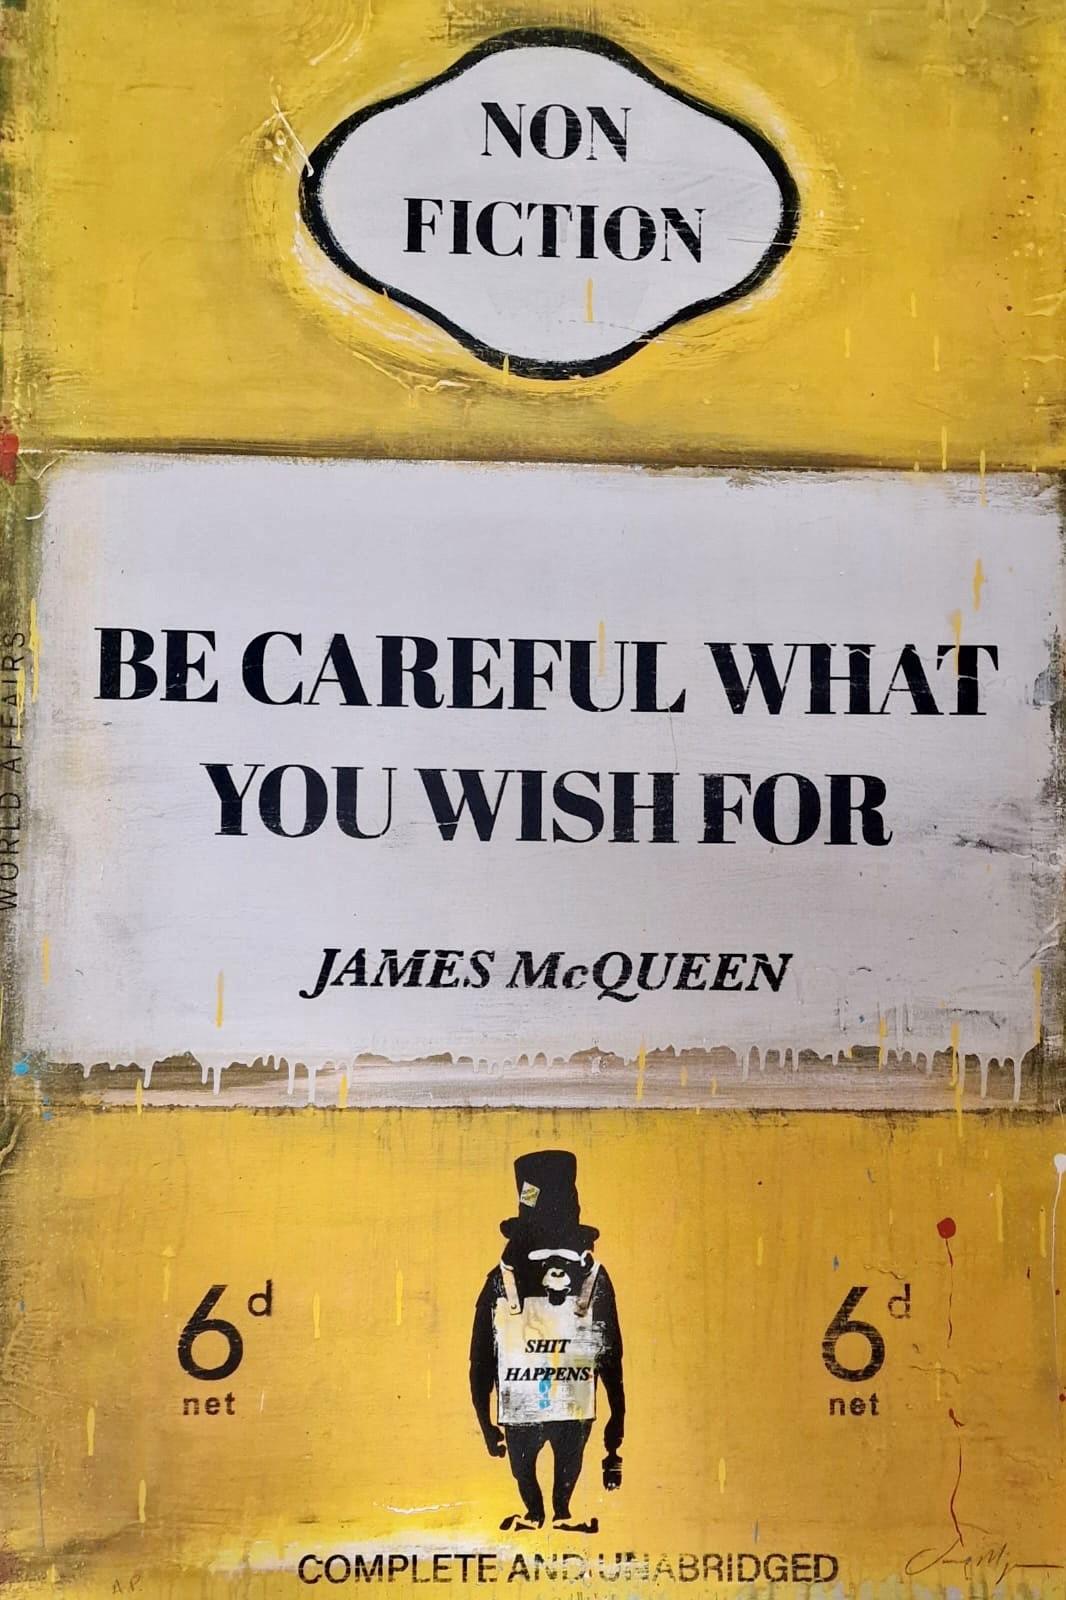 Be Careful What You Wish For - Print by James McQueen